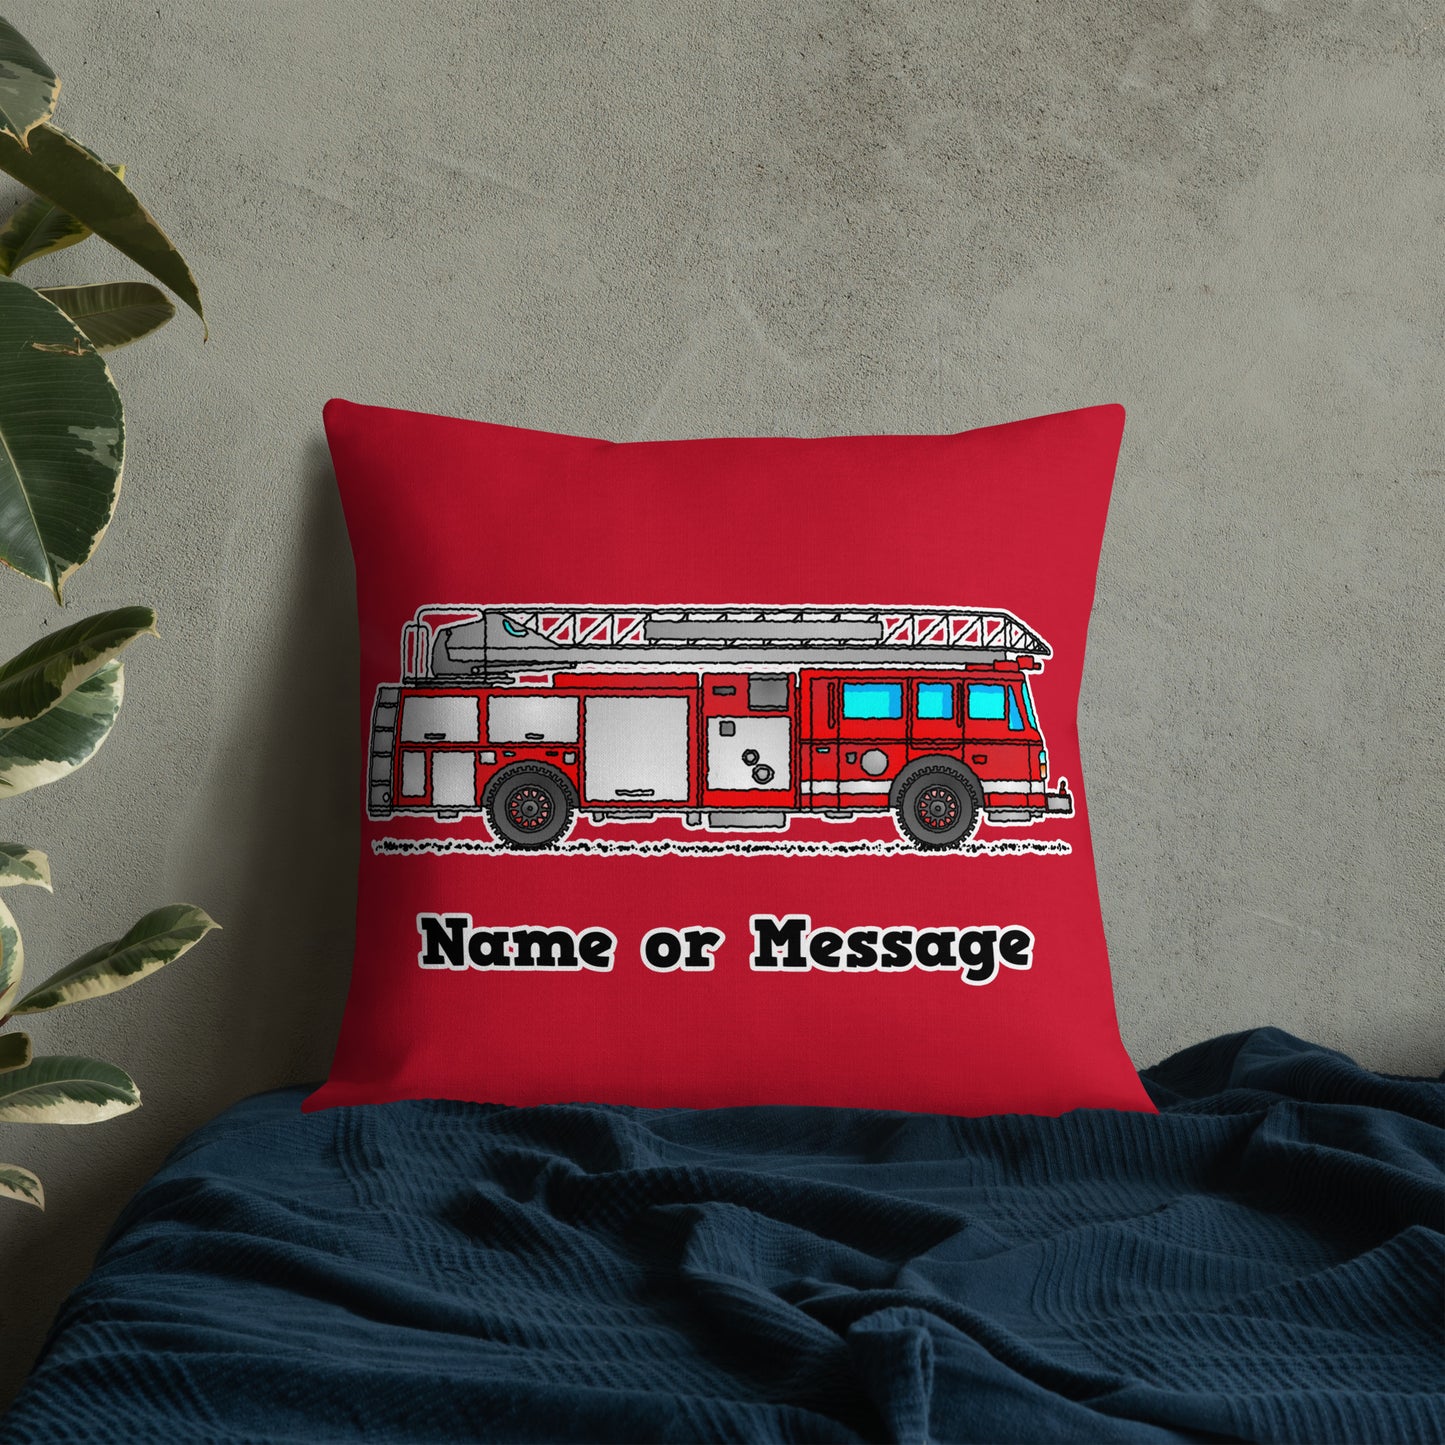 Red Fire Truck Throw Pillow Cushion. Firefighter Engine Vehicle P002